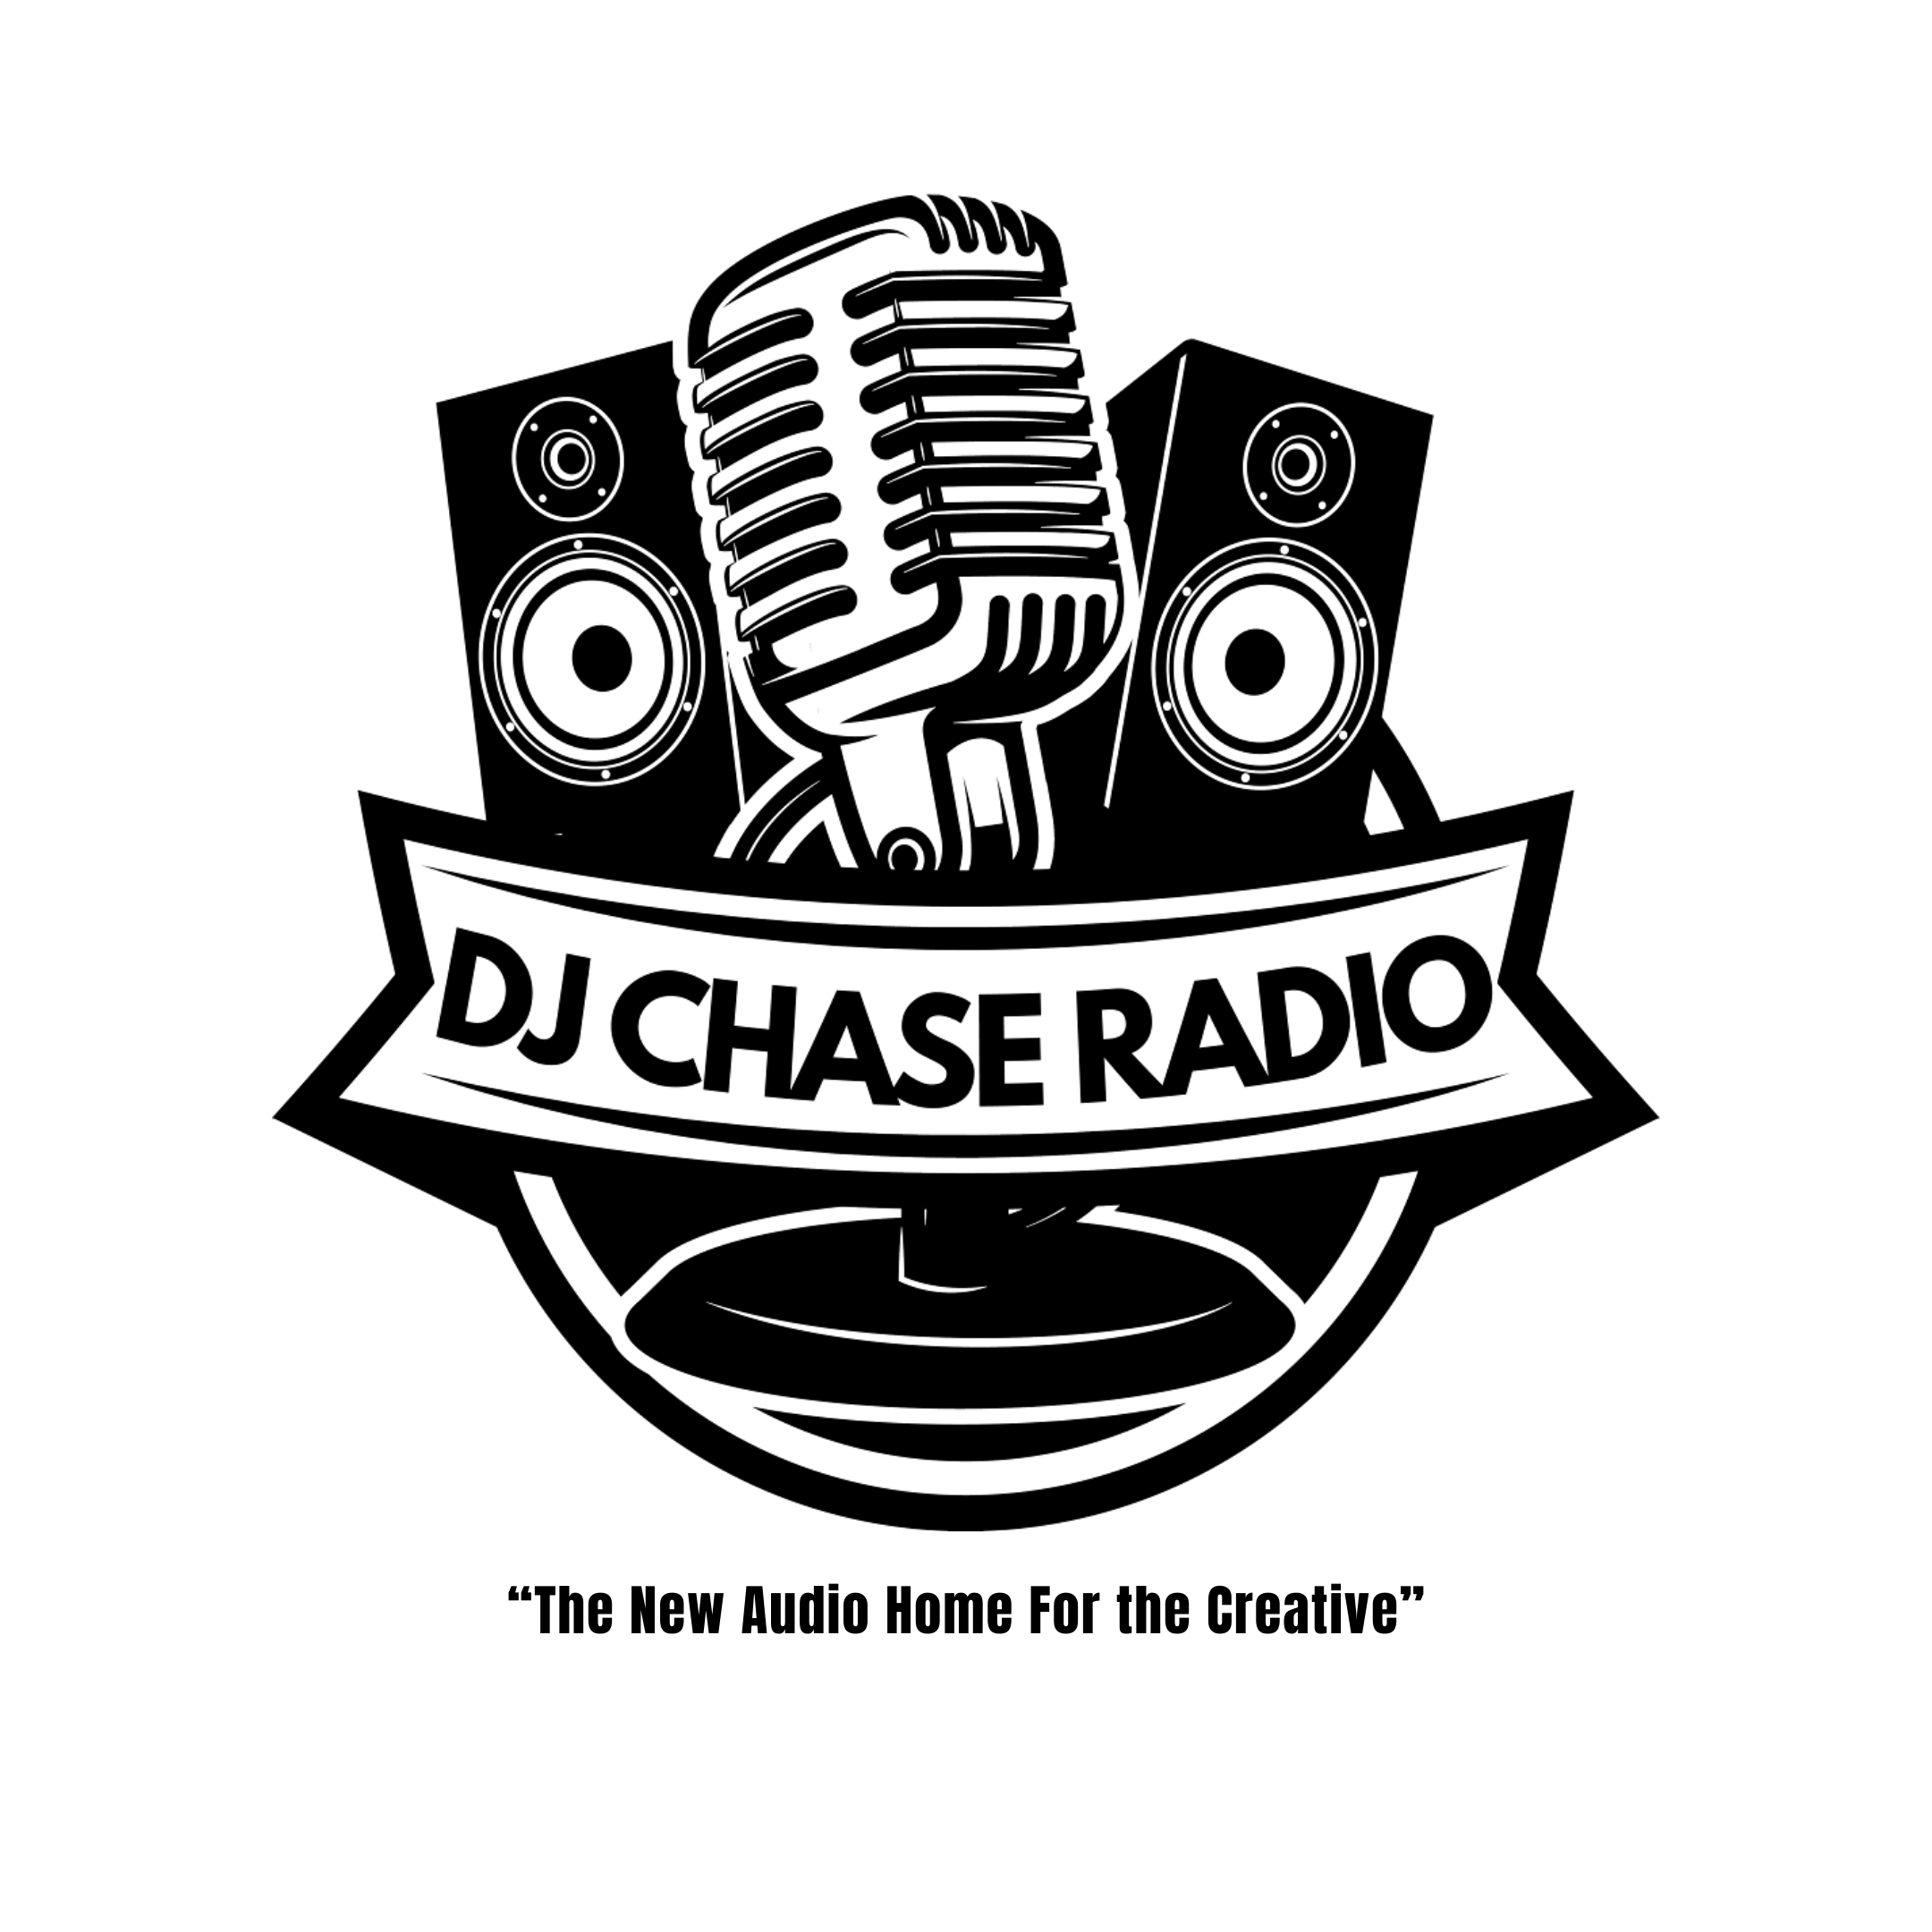 Art for You Are Now Listening to WDJC-DB DJ Chase Radio by DJ Chase Radio